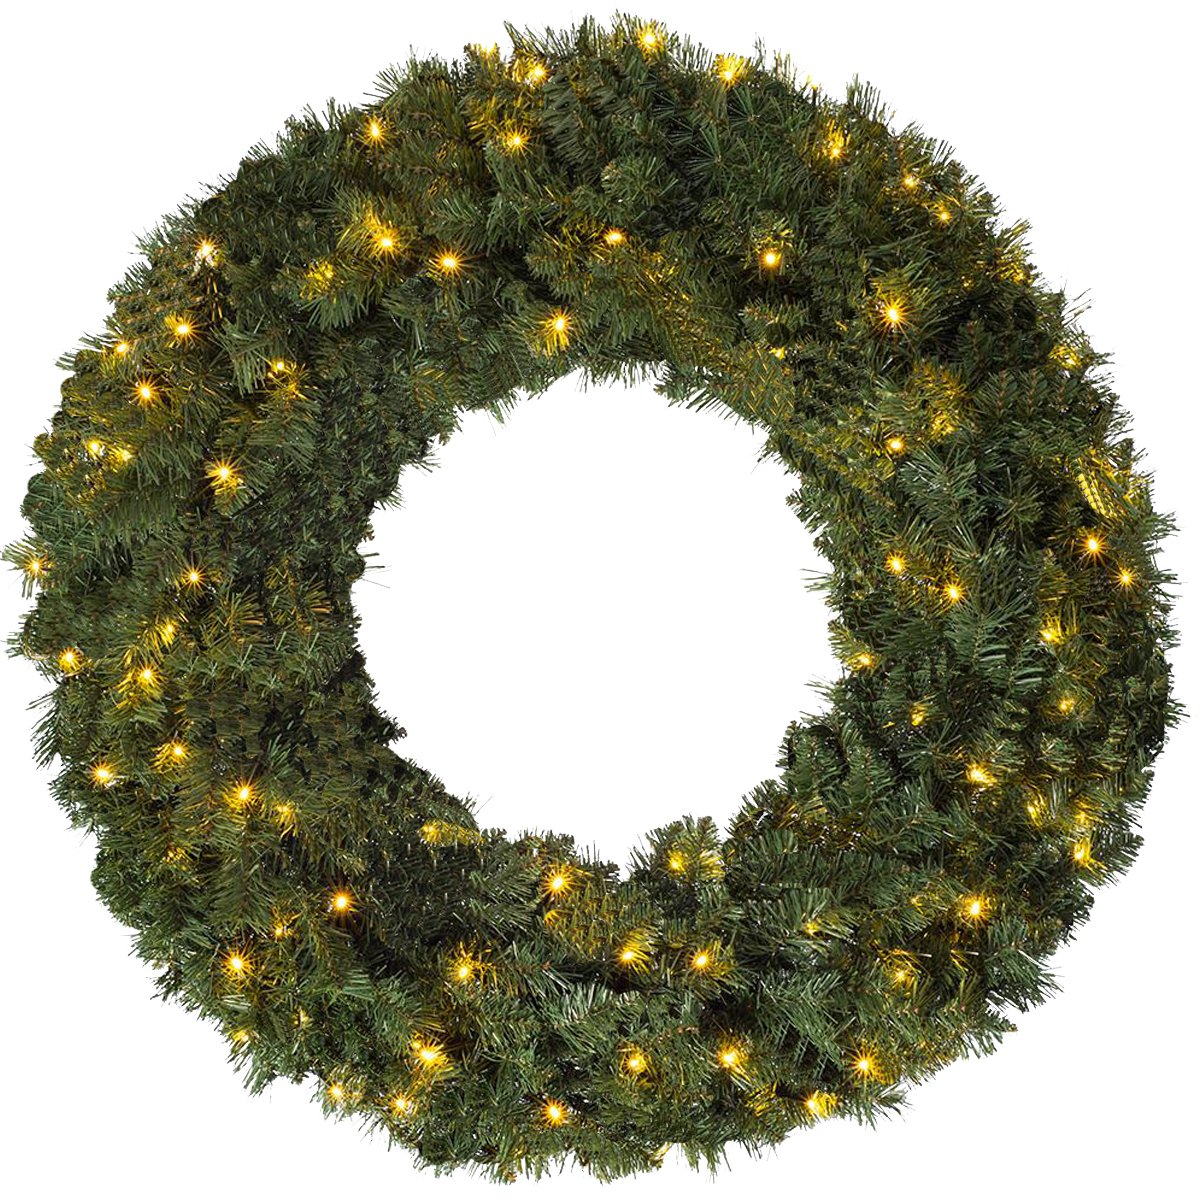 Add a festive touch your home during the holidays with this stylish Christmas wreath which is simplistic and stylish in its design. Our 70cm Christmas wreath features 100 warm white low energy LED lights evenly spaced throughout, which look excellent when lit. Each Christmas wreath features an extremely strong wire frame that supports the crown of foliage and will keep looking fresh and lovely for many years